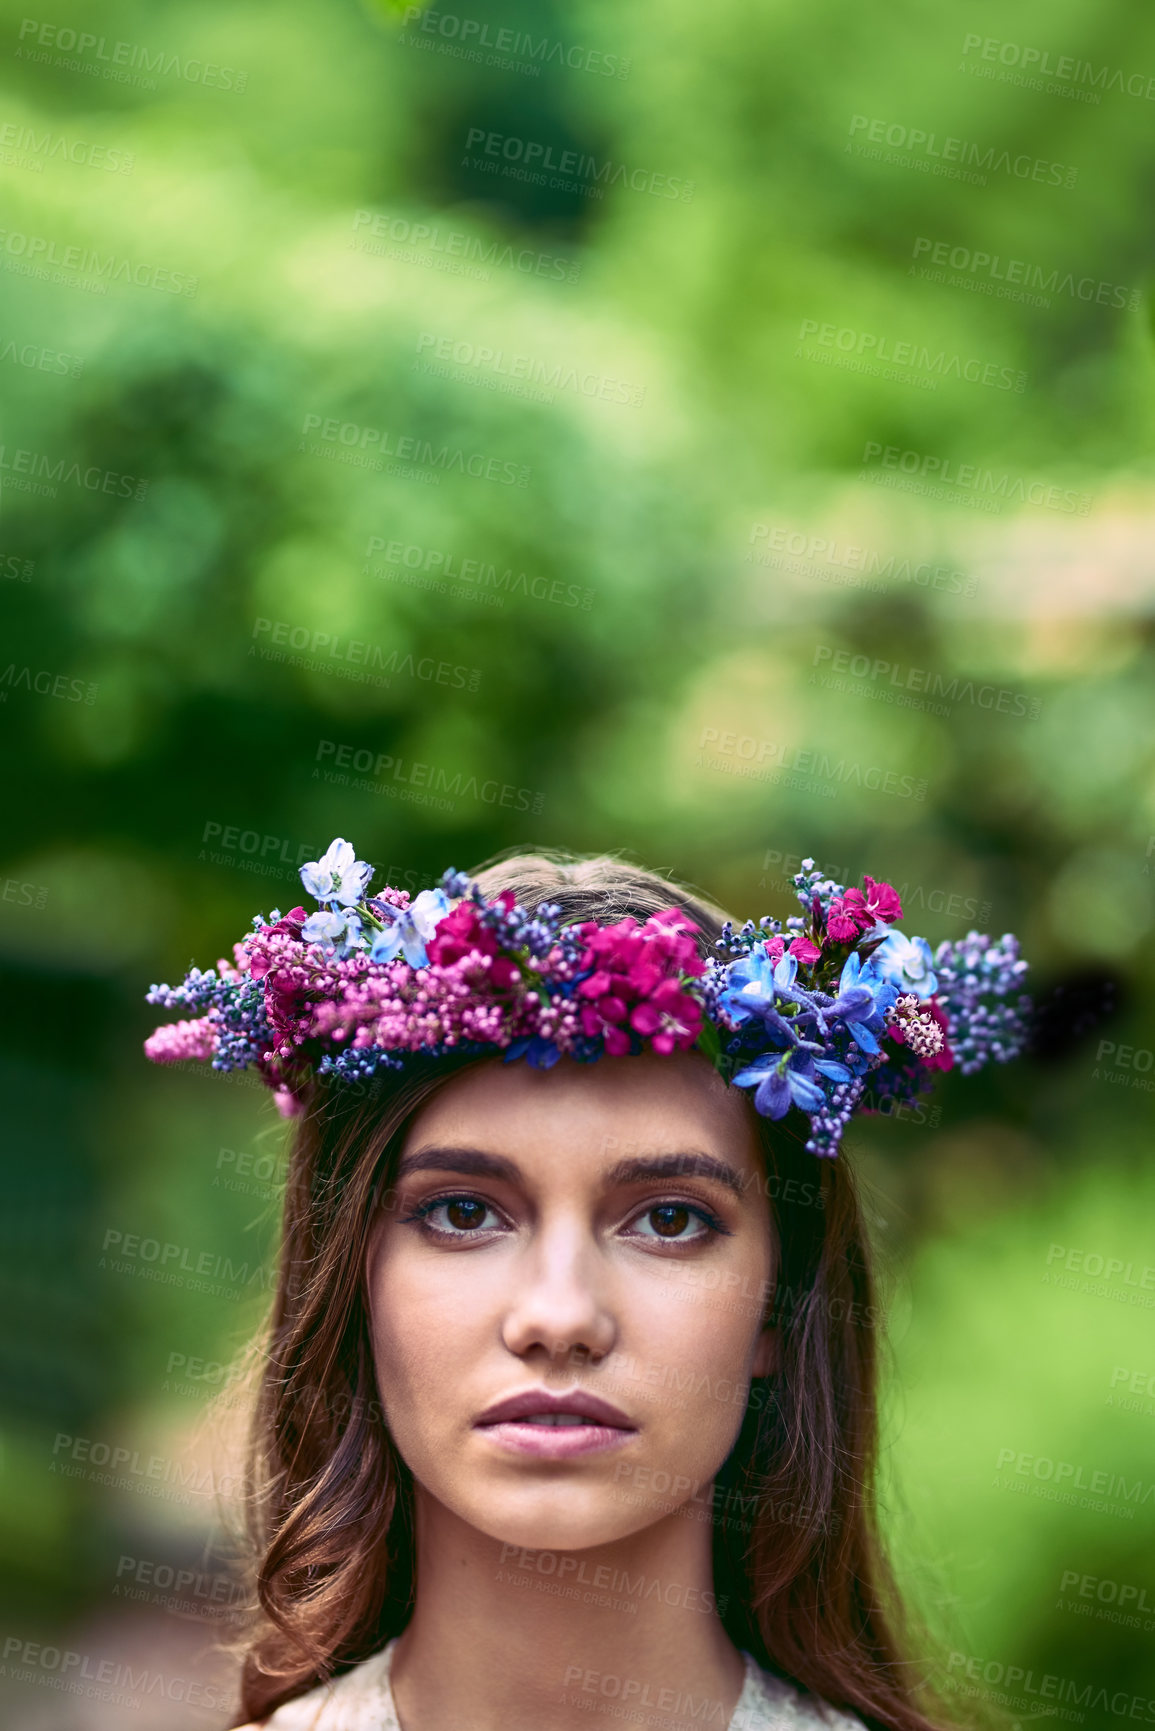 Buy stock photo Cropped shot of a beautiful young woman wearing a floral head wreath posing in nature